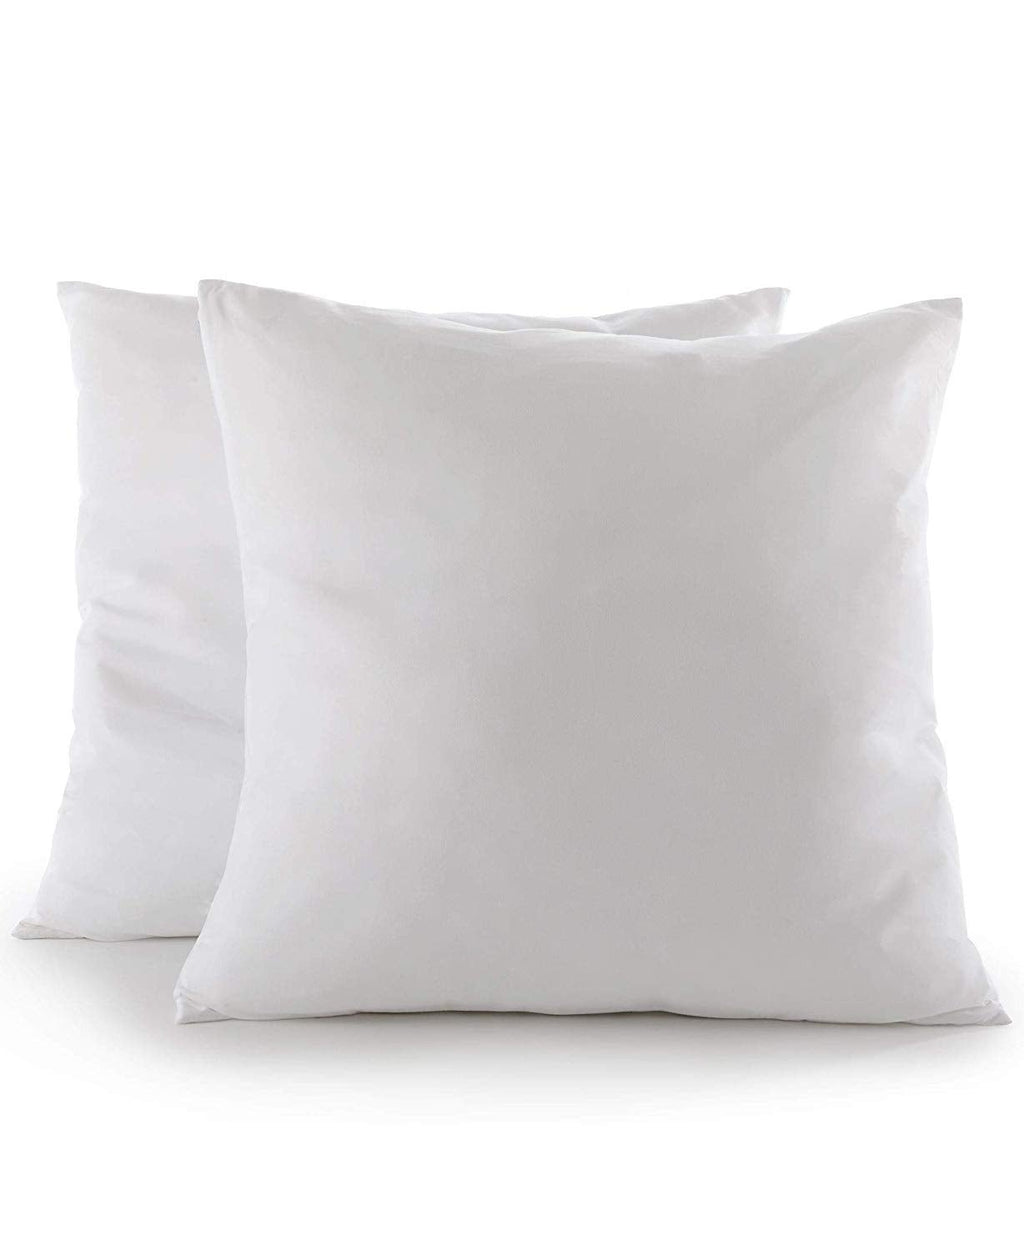 https://www.cheercollection.com/cdn/shop/products/cheer-collection-set-of-2-decorative-white-square-accent-throw-pillows-and-insert-for-couch-sofa-bed-includes-zippered-cover-647618_1024x.jpg?v=1671778447